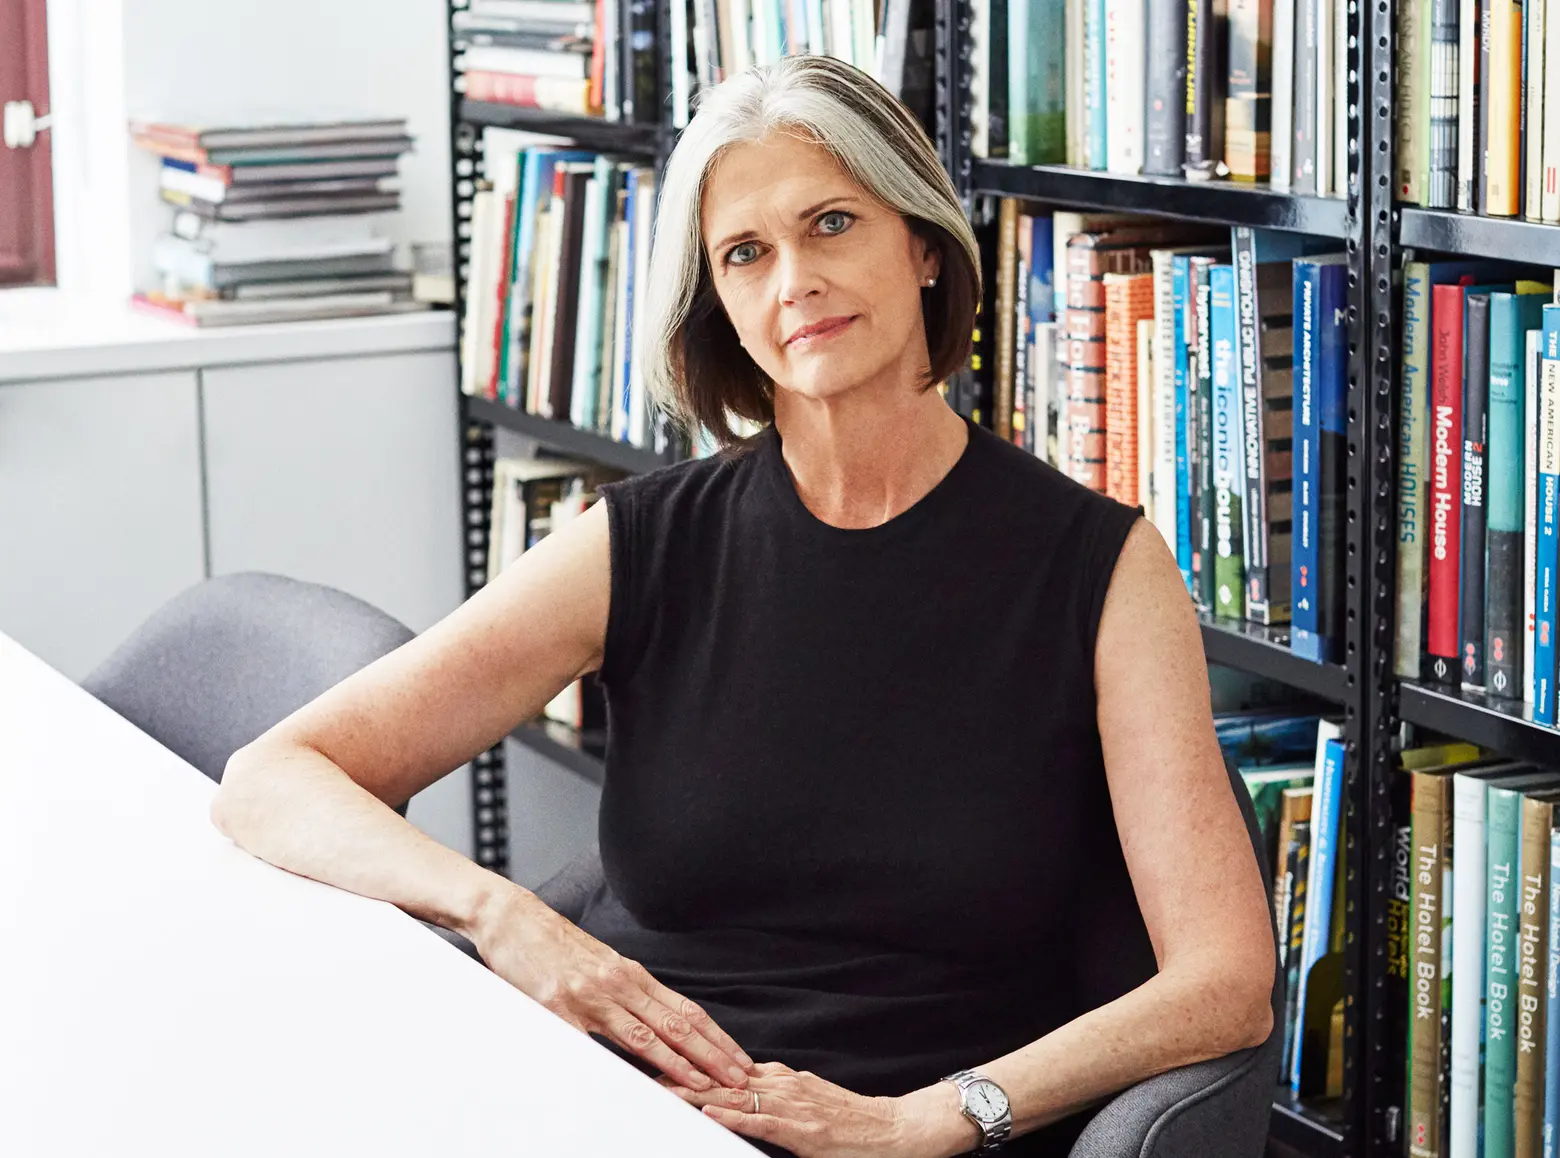 INTERVIEW: Deborah Berke on Becoming Dean of Yale Architecture School, and Her New Book